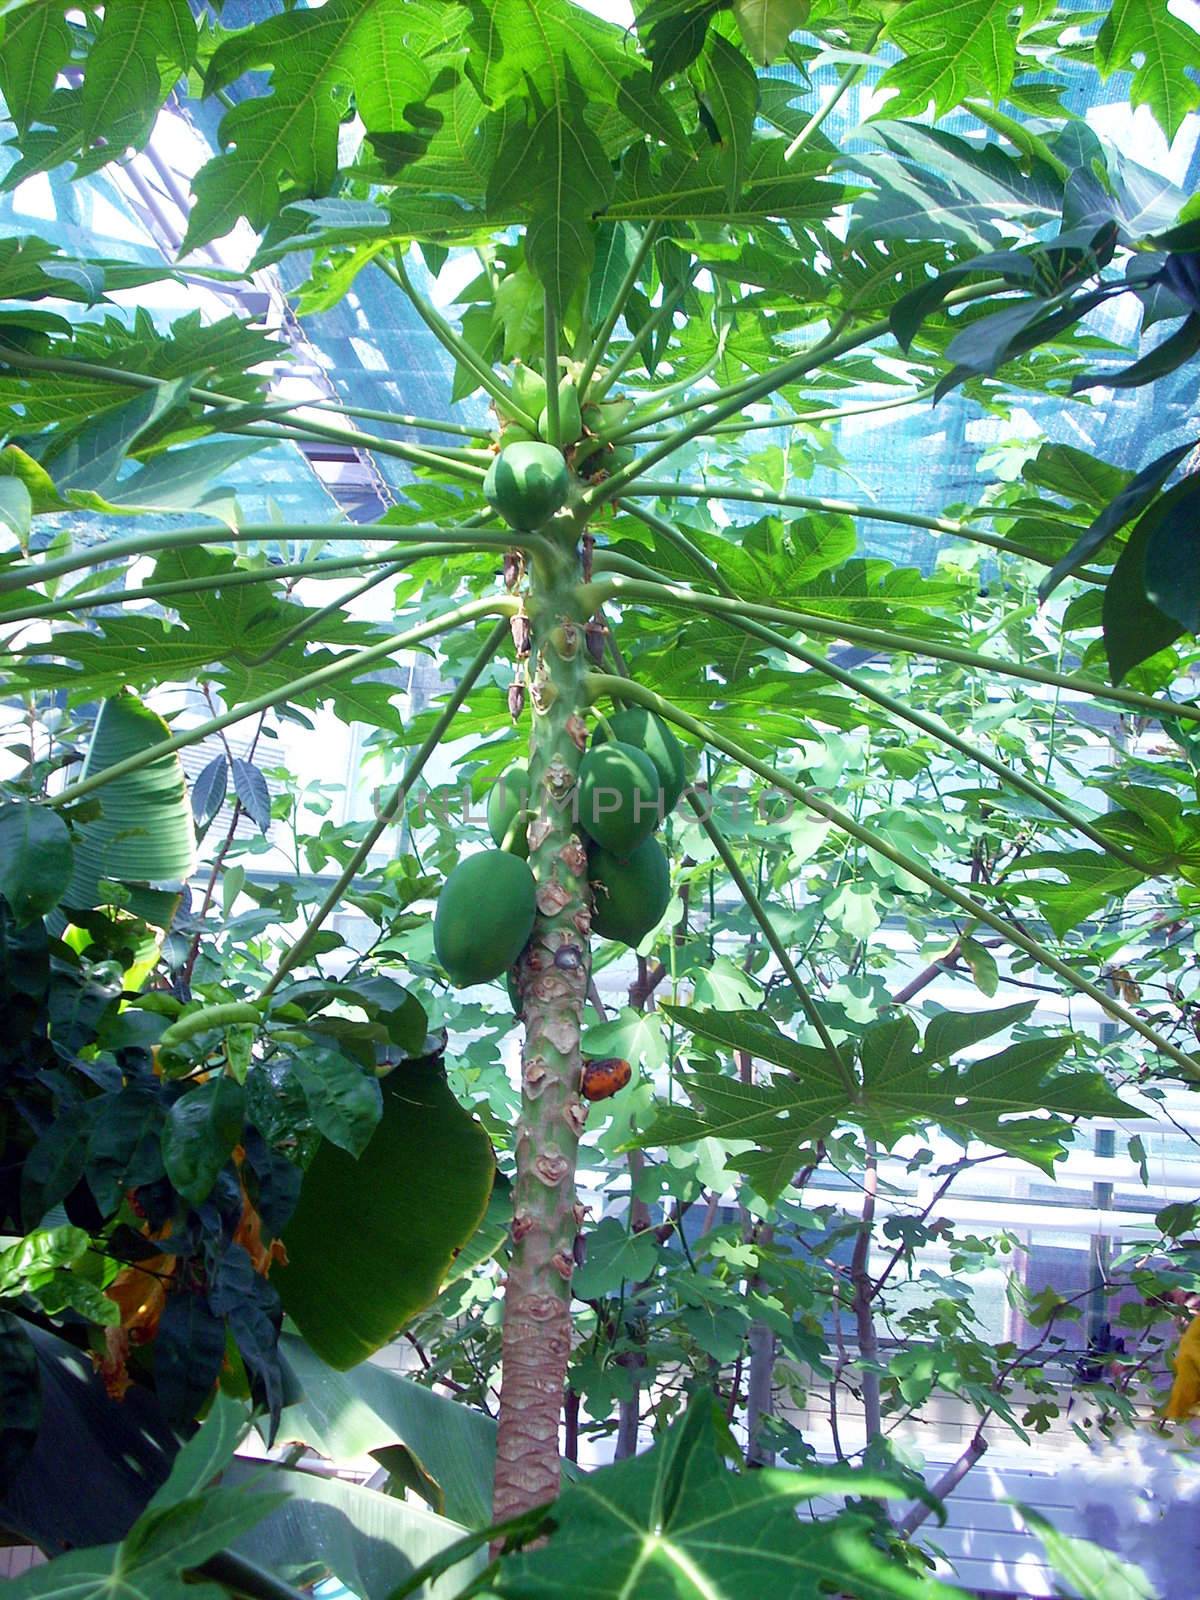 Coconut tree in a greenhouse